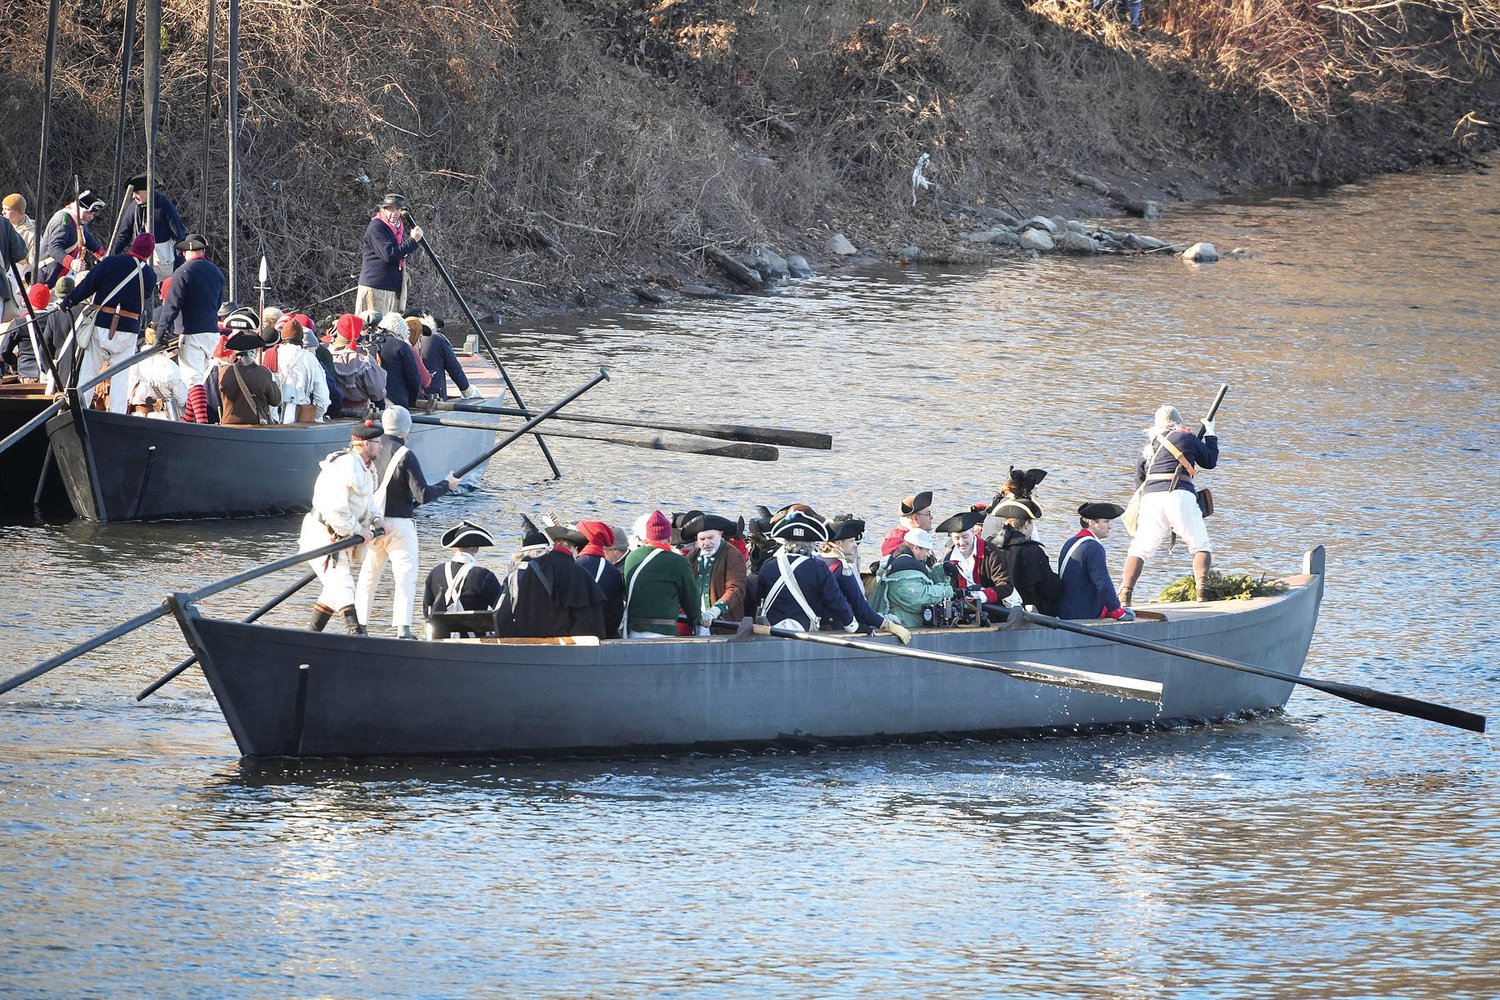 The boat containing Gen. George Washington and Fox News’ Pete Hegseth begins to cross the Delaware River.